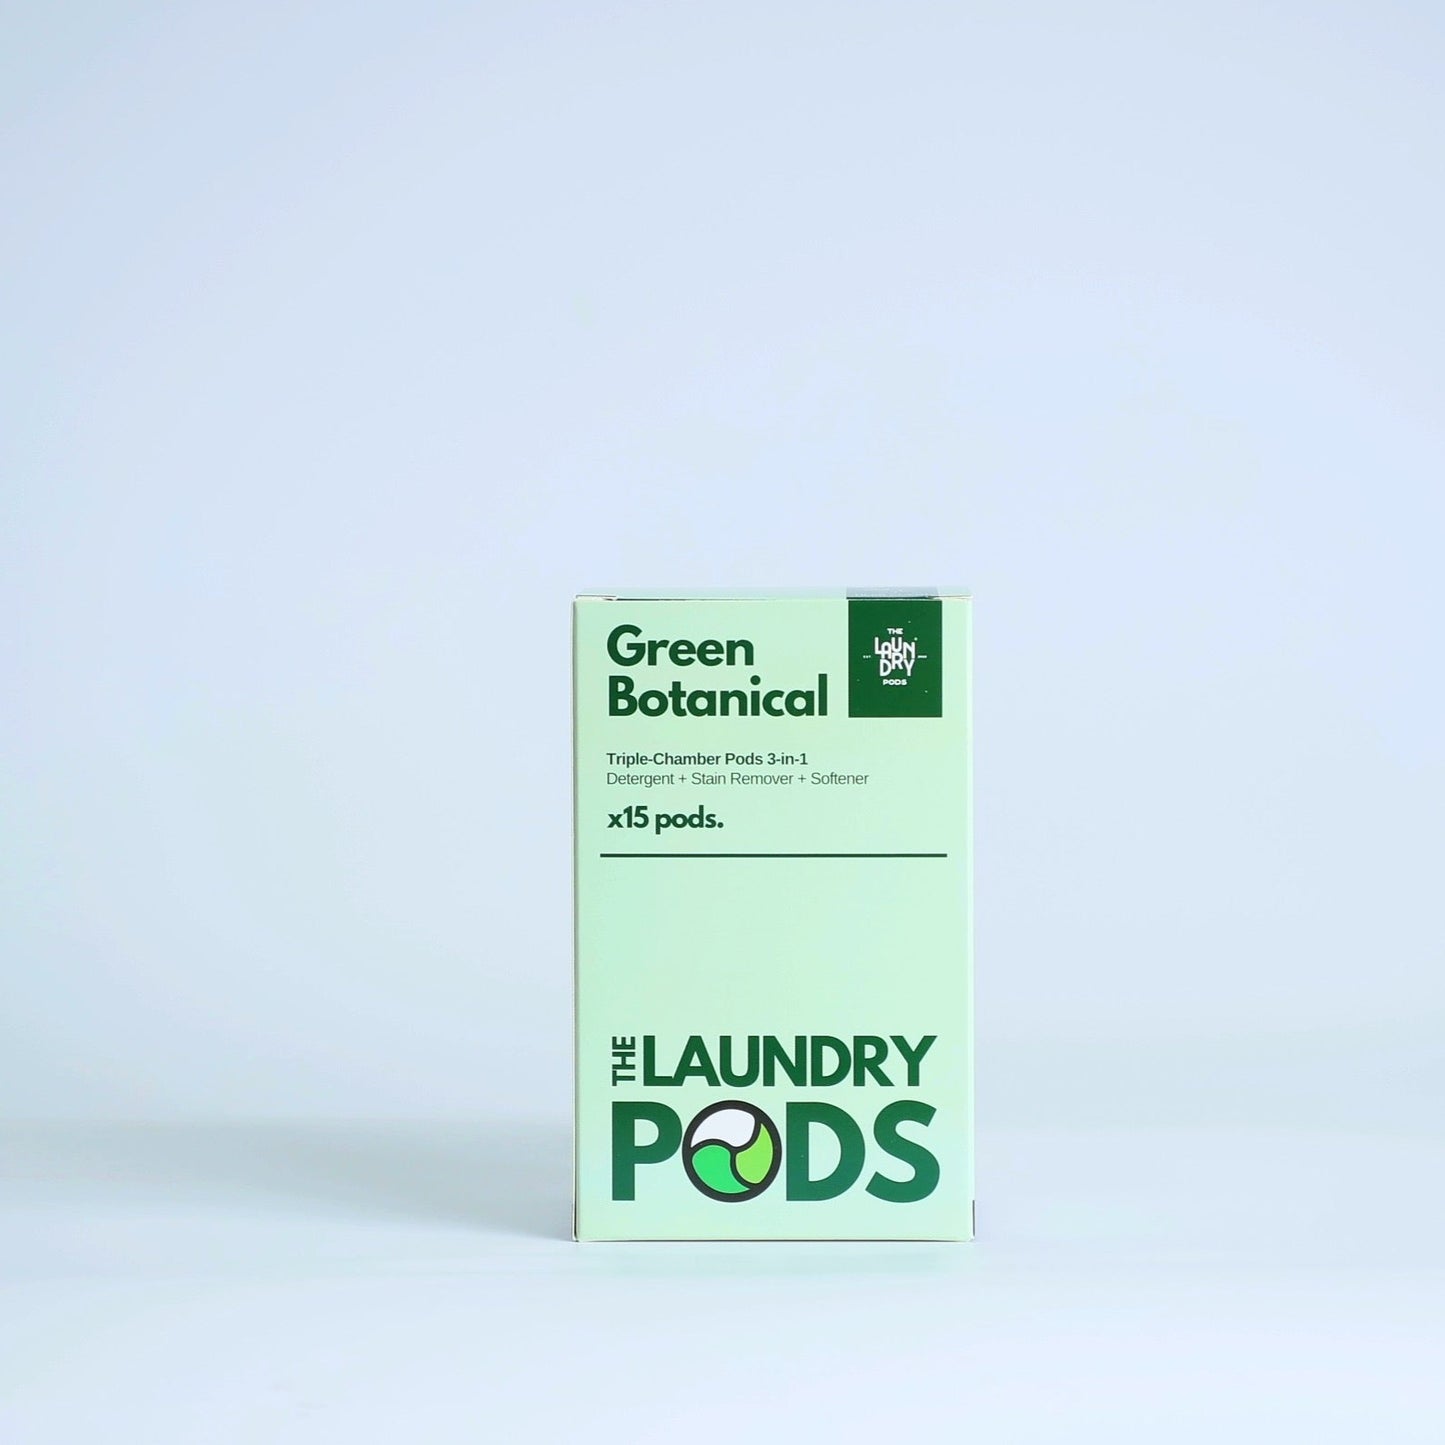 Green Botanica | 15pcs Biodegradable Laundry Pods | by The Laundry Pods